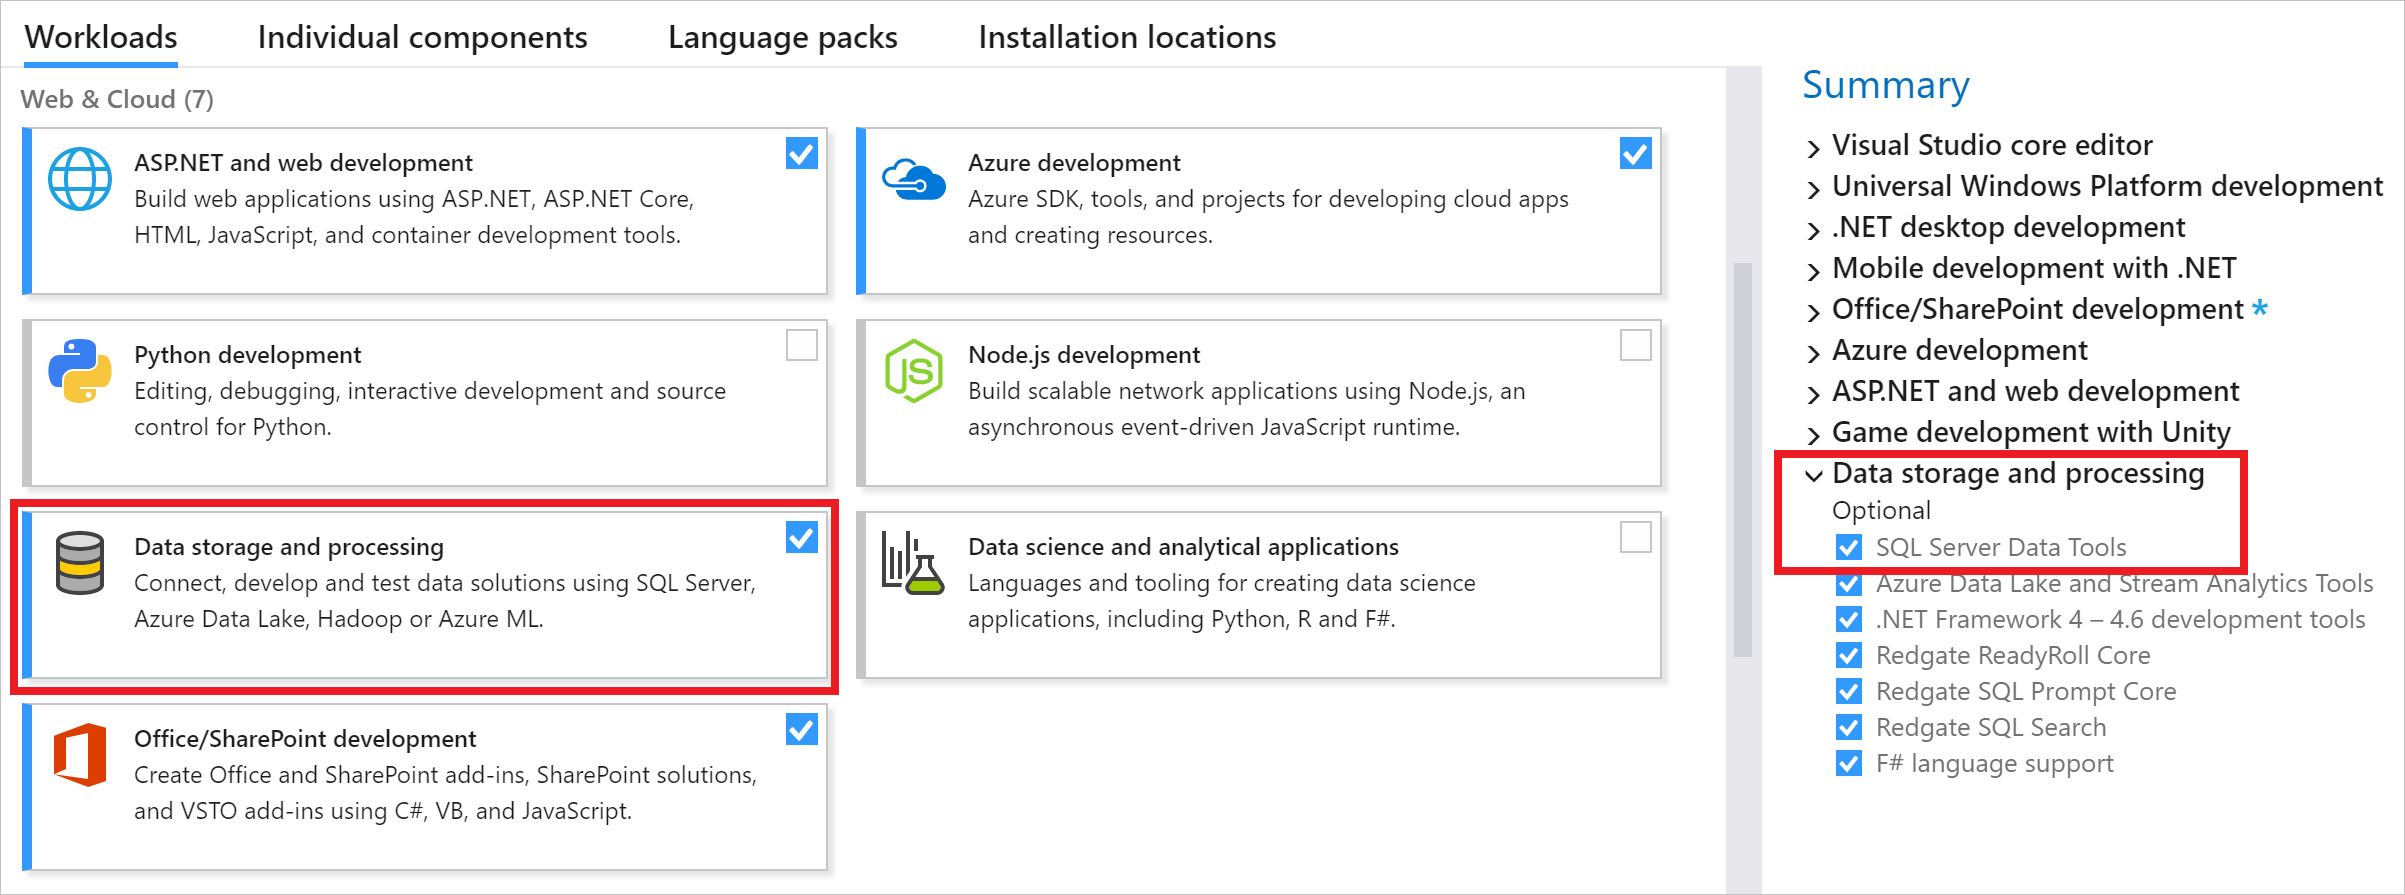 Previous releases of SQL Server Data Tools (SSDT) - SQL Server Data Tools  (SSDT) | Microsoft Learn